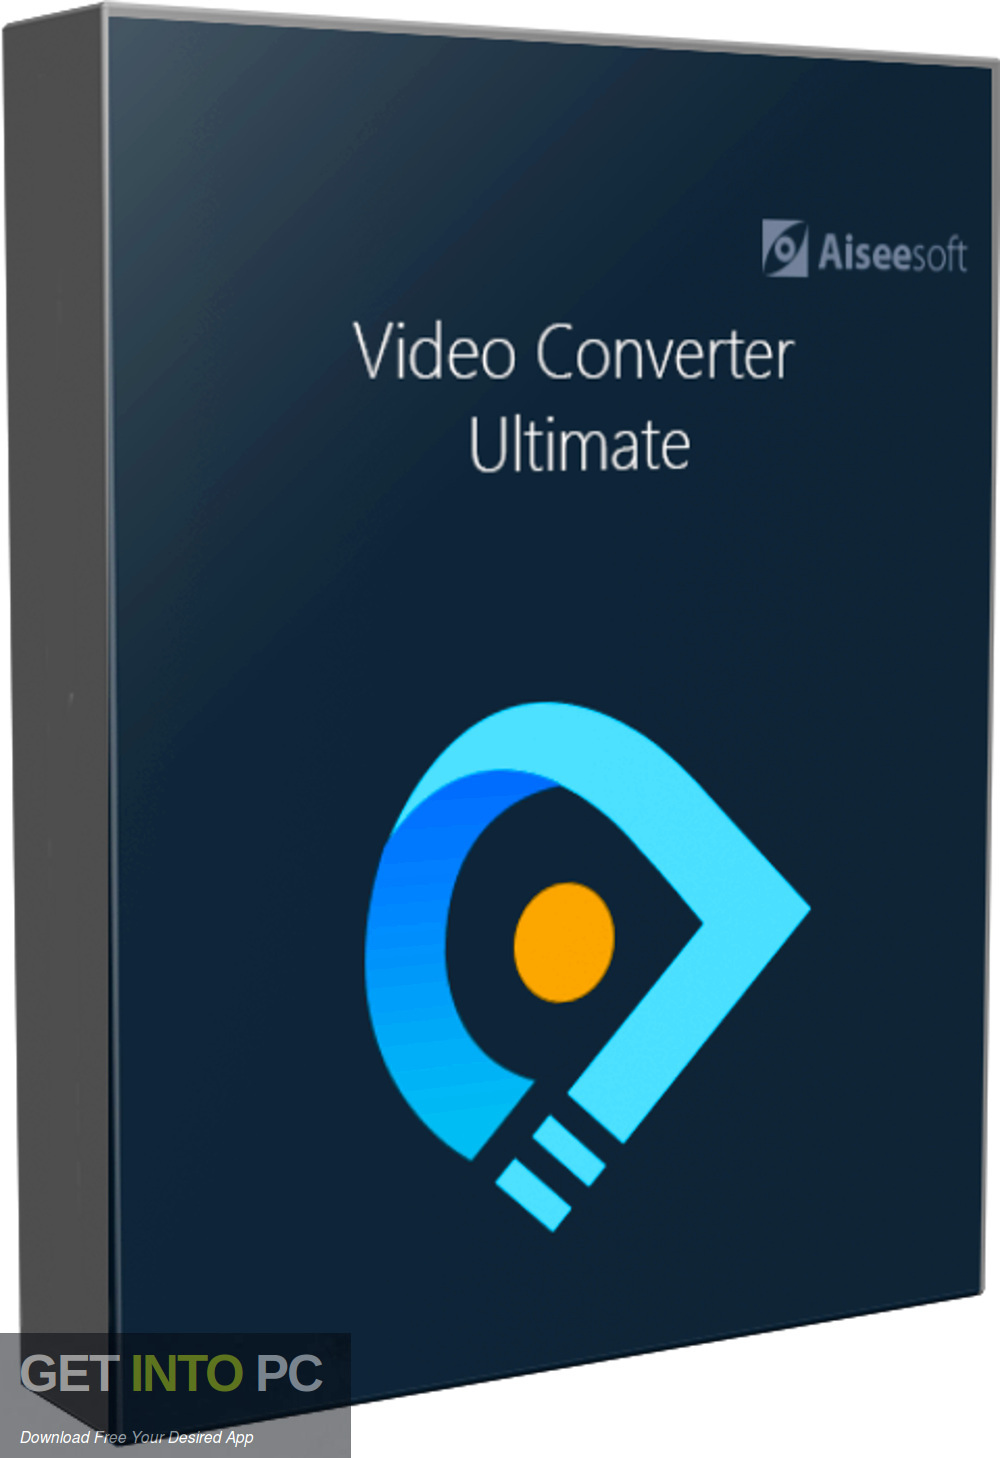 Aiseesoft Video Converter Ultimate 10.5.50 (x64) Unattended